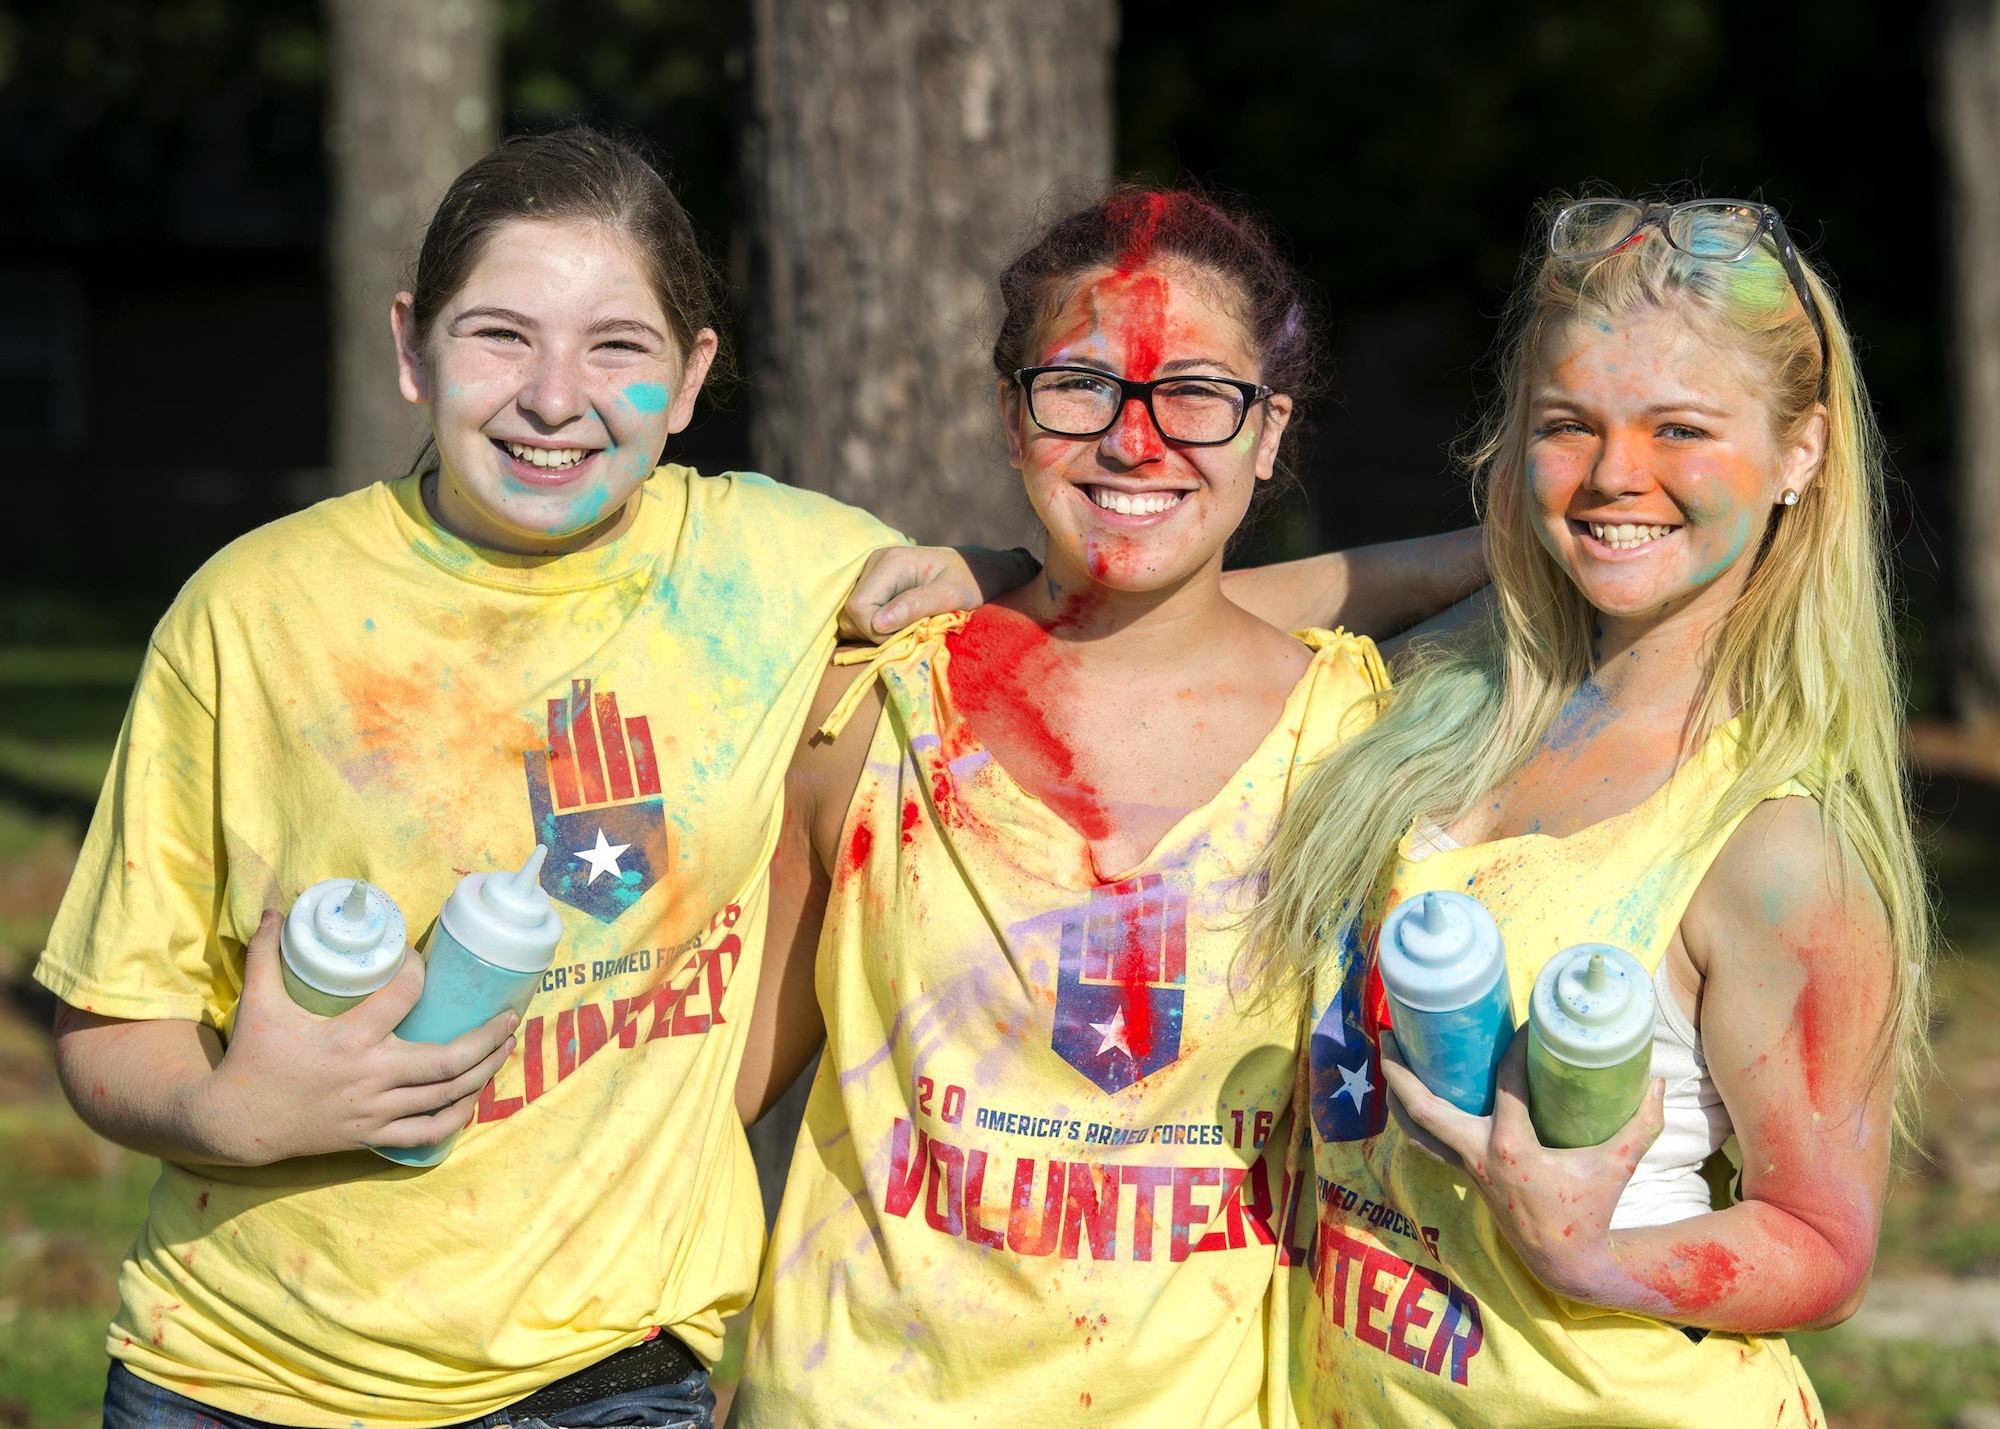 Volunteers pose for a photo during a Kid’s Color Run, Sept. 10, 2016, at Moody Air Force Base, Ga. Volunteers from Moody Youth Programs splashed participants with colorful scented chalk. (U.S. Air Force photo by Airman 1st Class Janiqua P. Robinson)